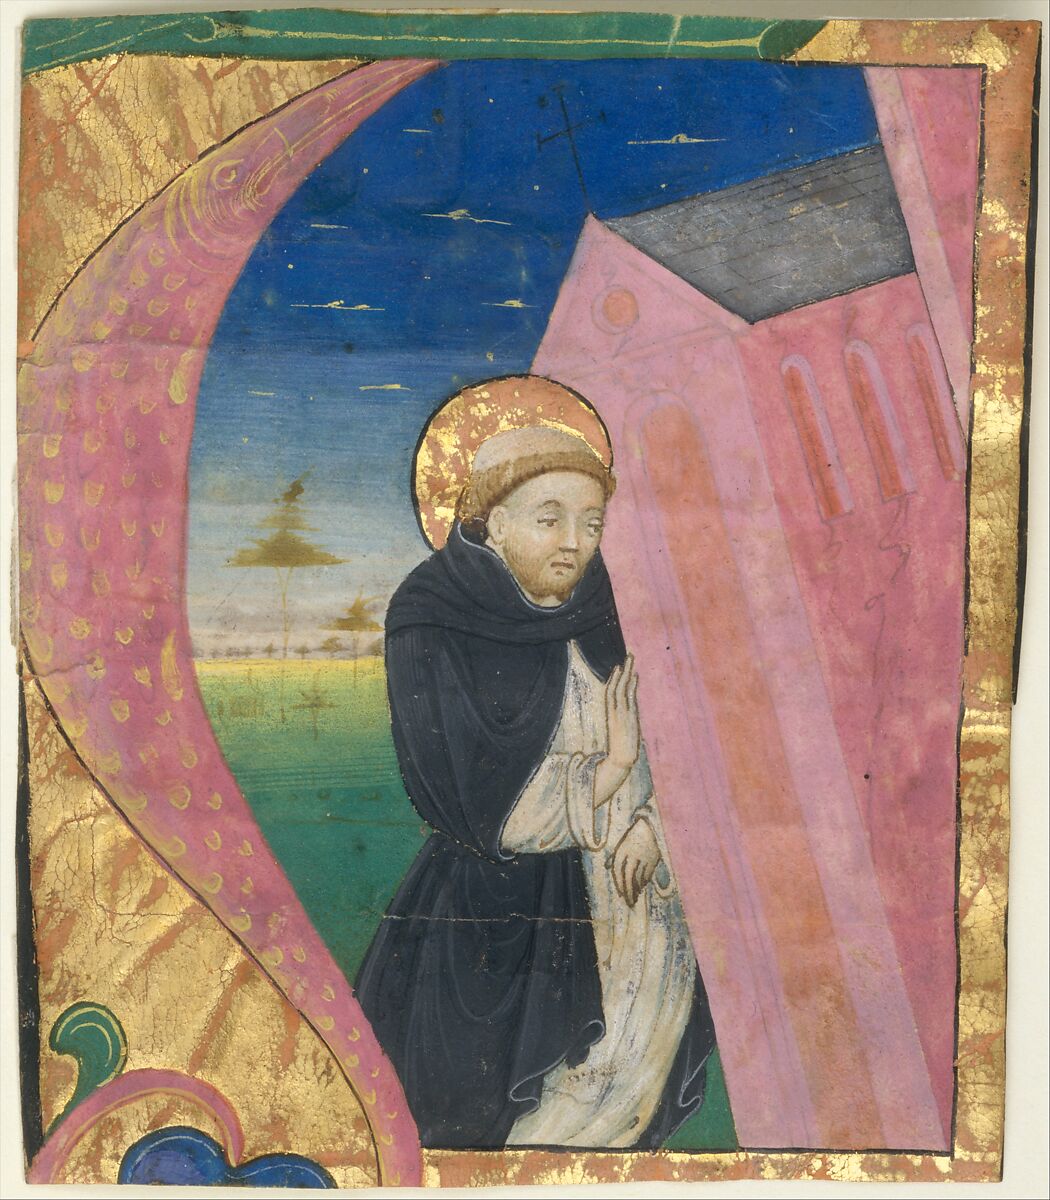 Manuscript Illumination with Saint Dominic Saving the Church of Saint John Lateran in an Initial A, from a Gradual, Tempera, ink, and gold on parchment, Italian 